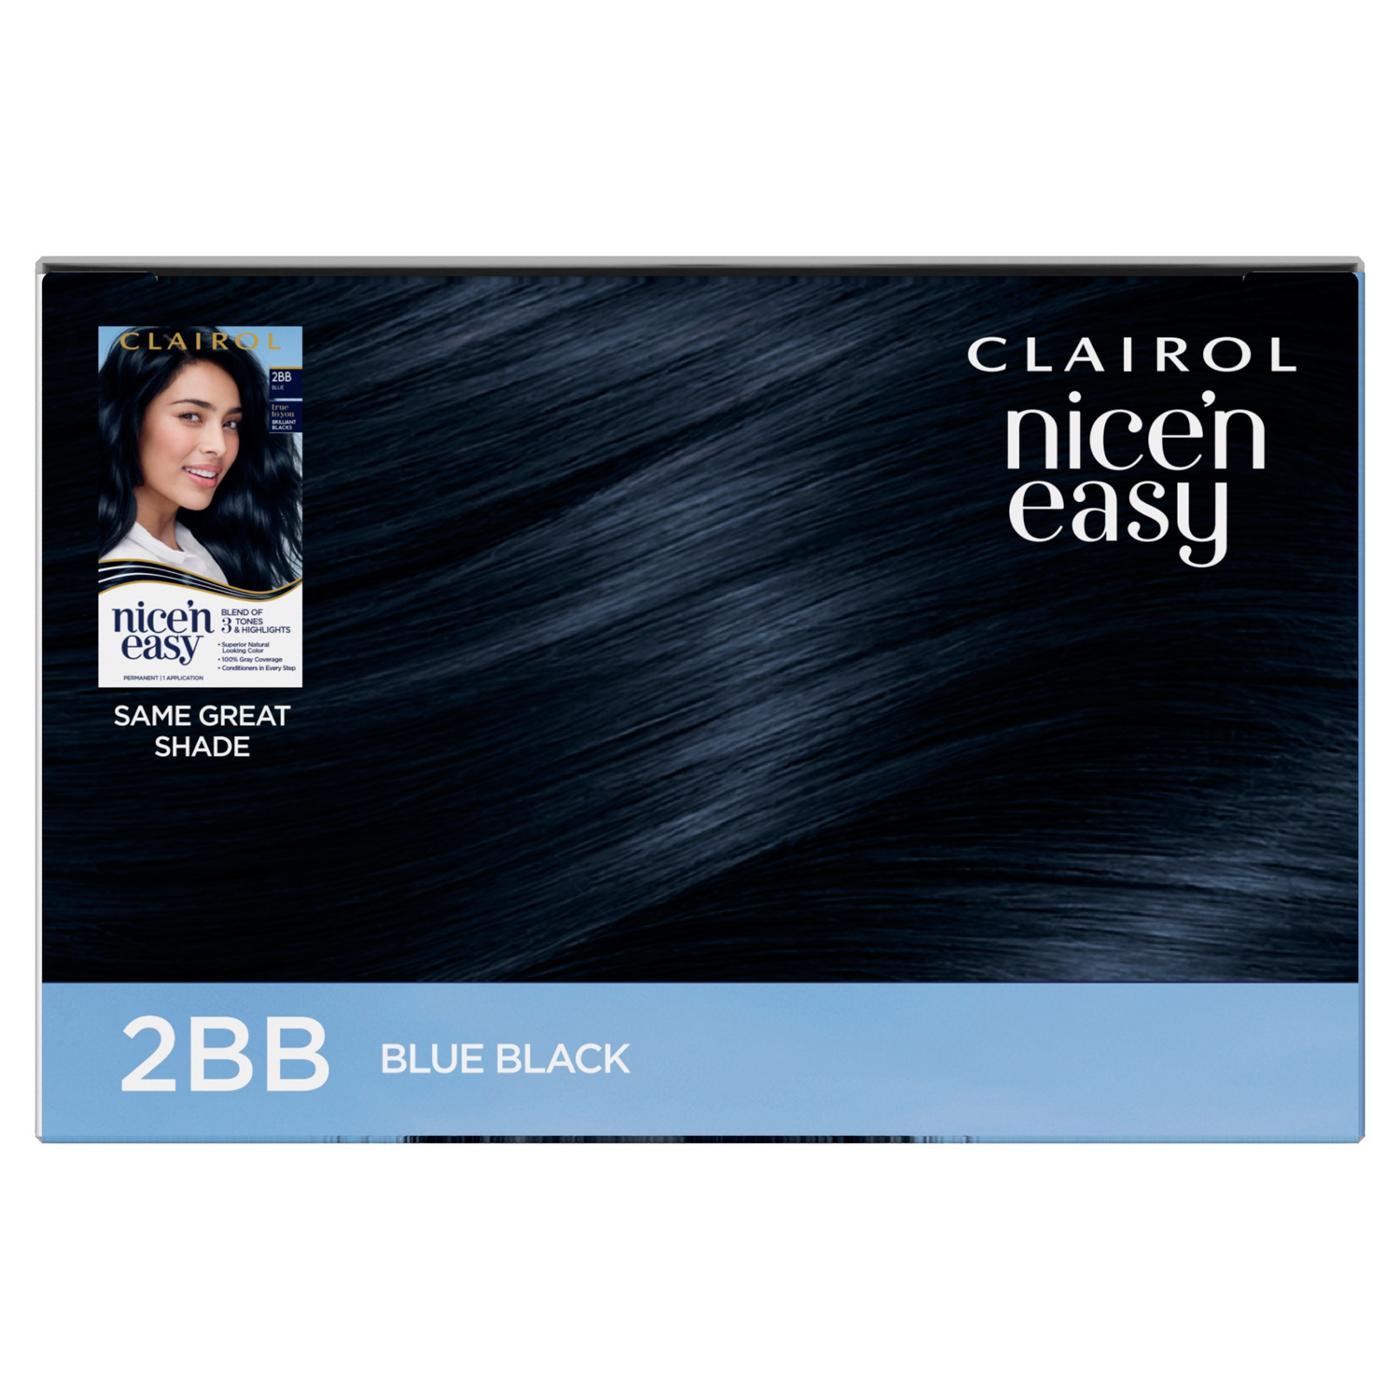 Clairol Nice 'N Easy Permanent Hair color - 2BB Blue Black; image 3 of 10